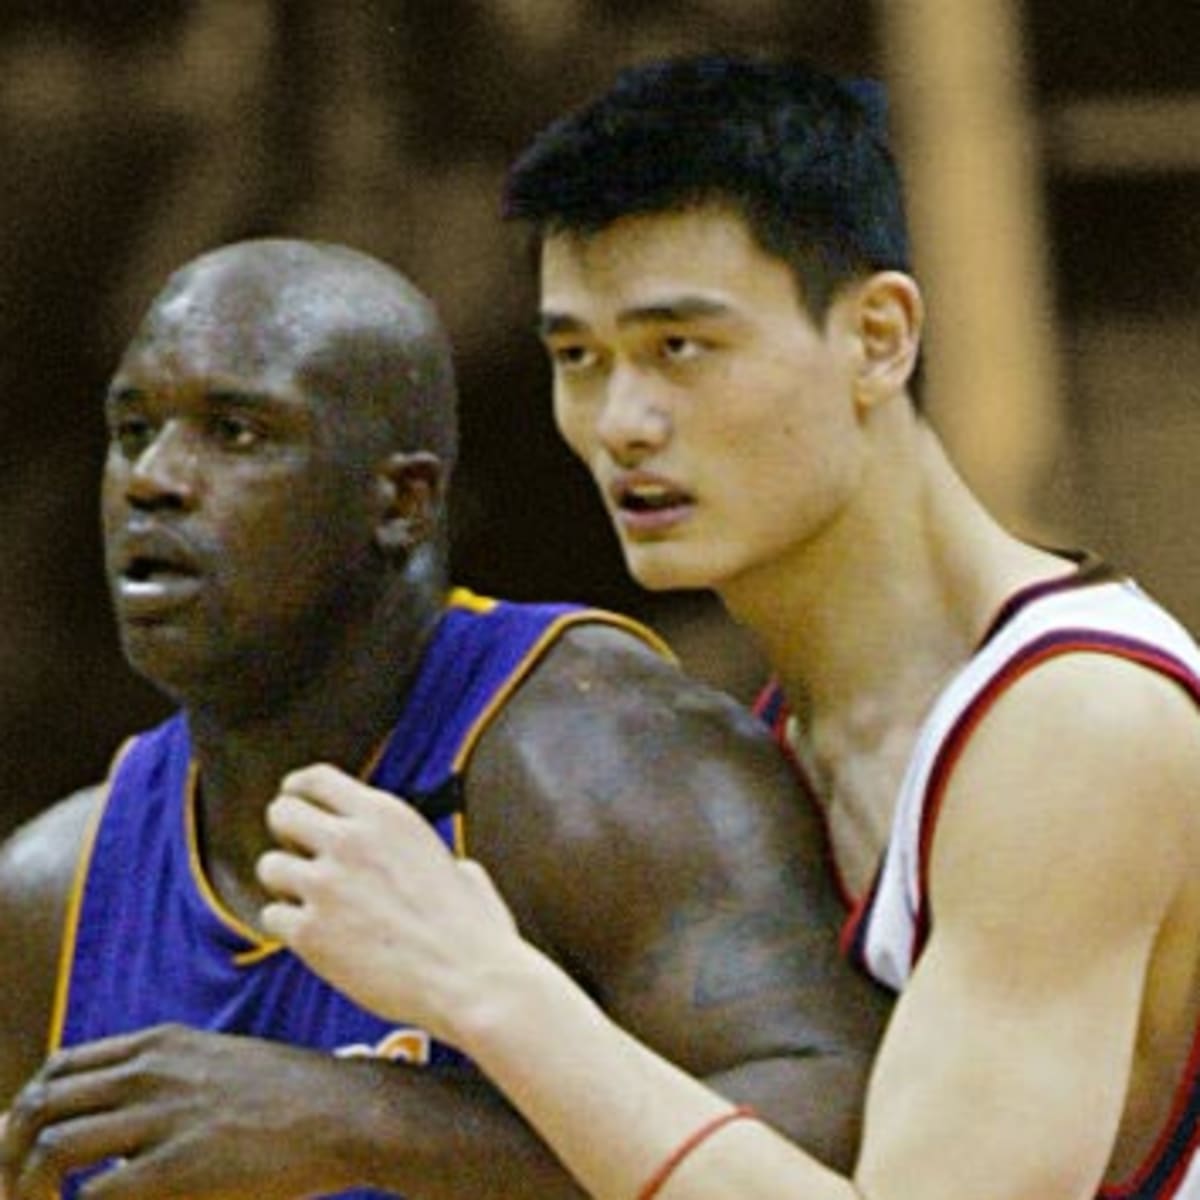 Shaquille O'Neal tells a hilarious story about old rival Yao Ming